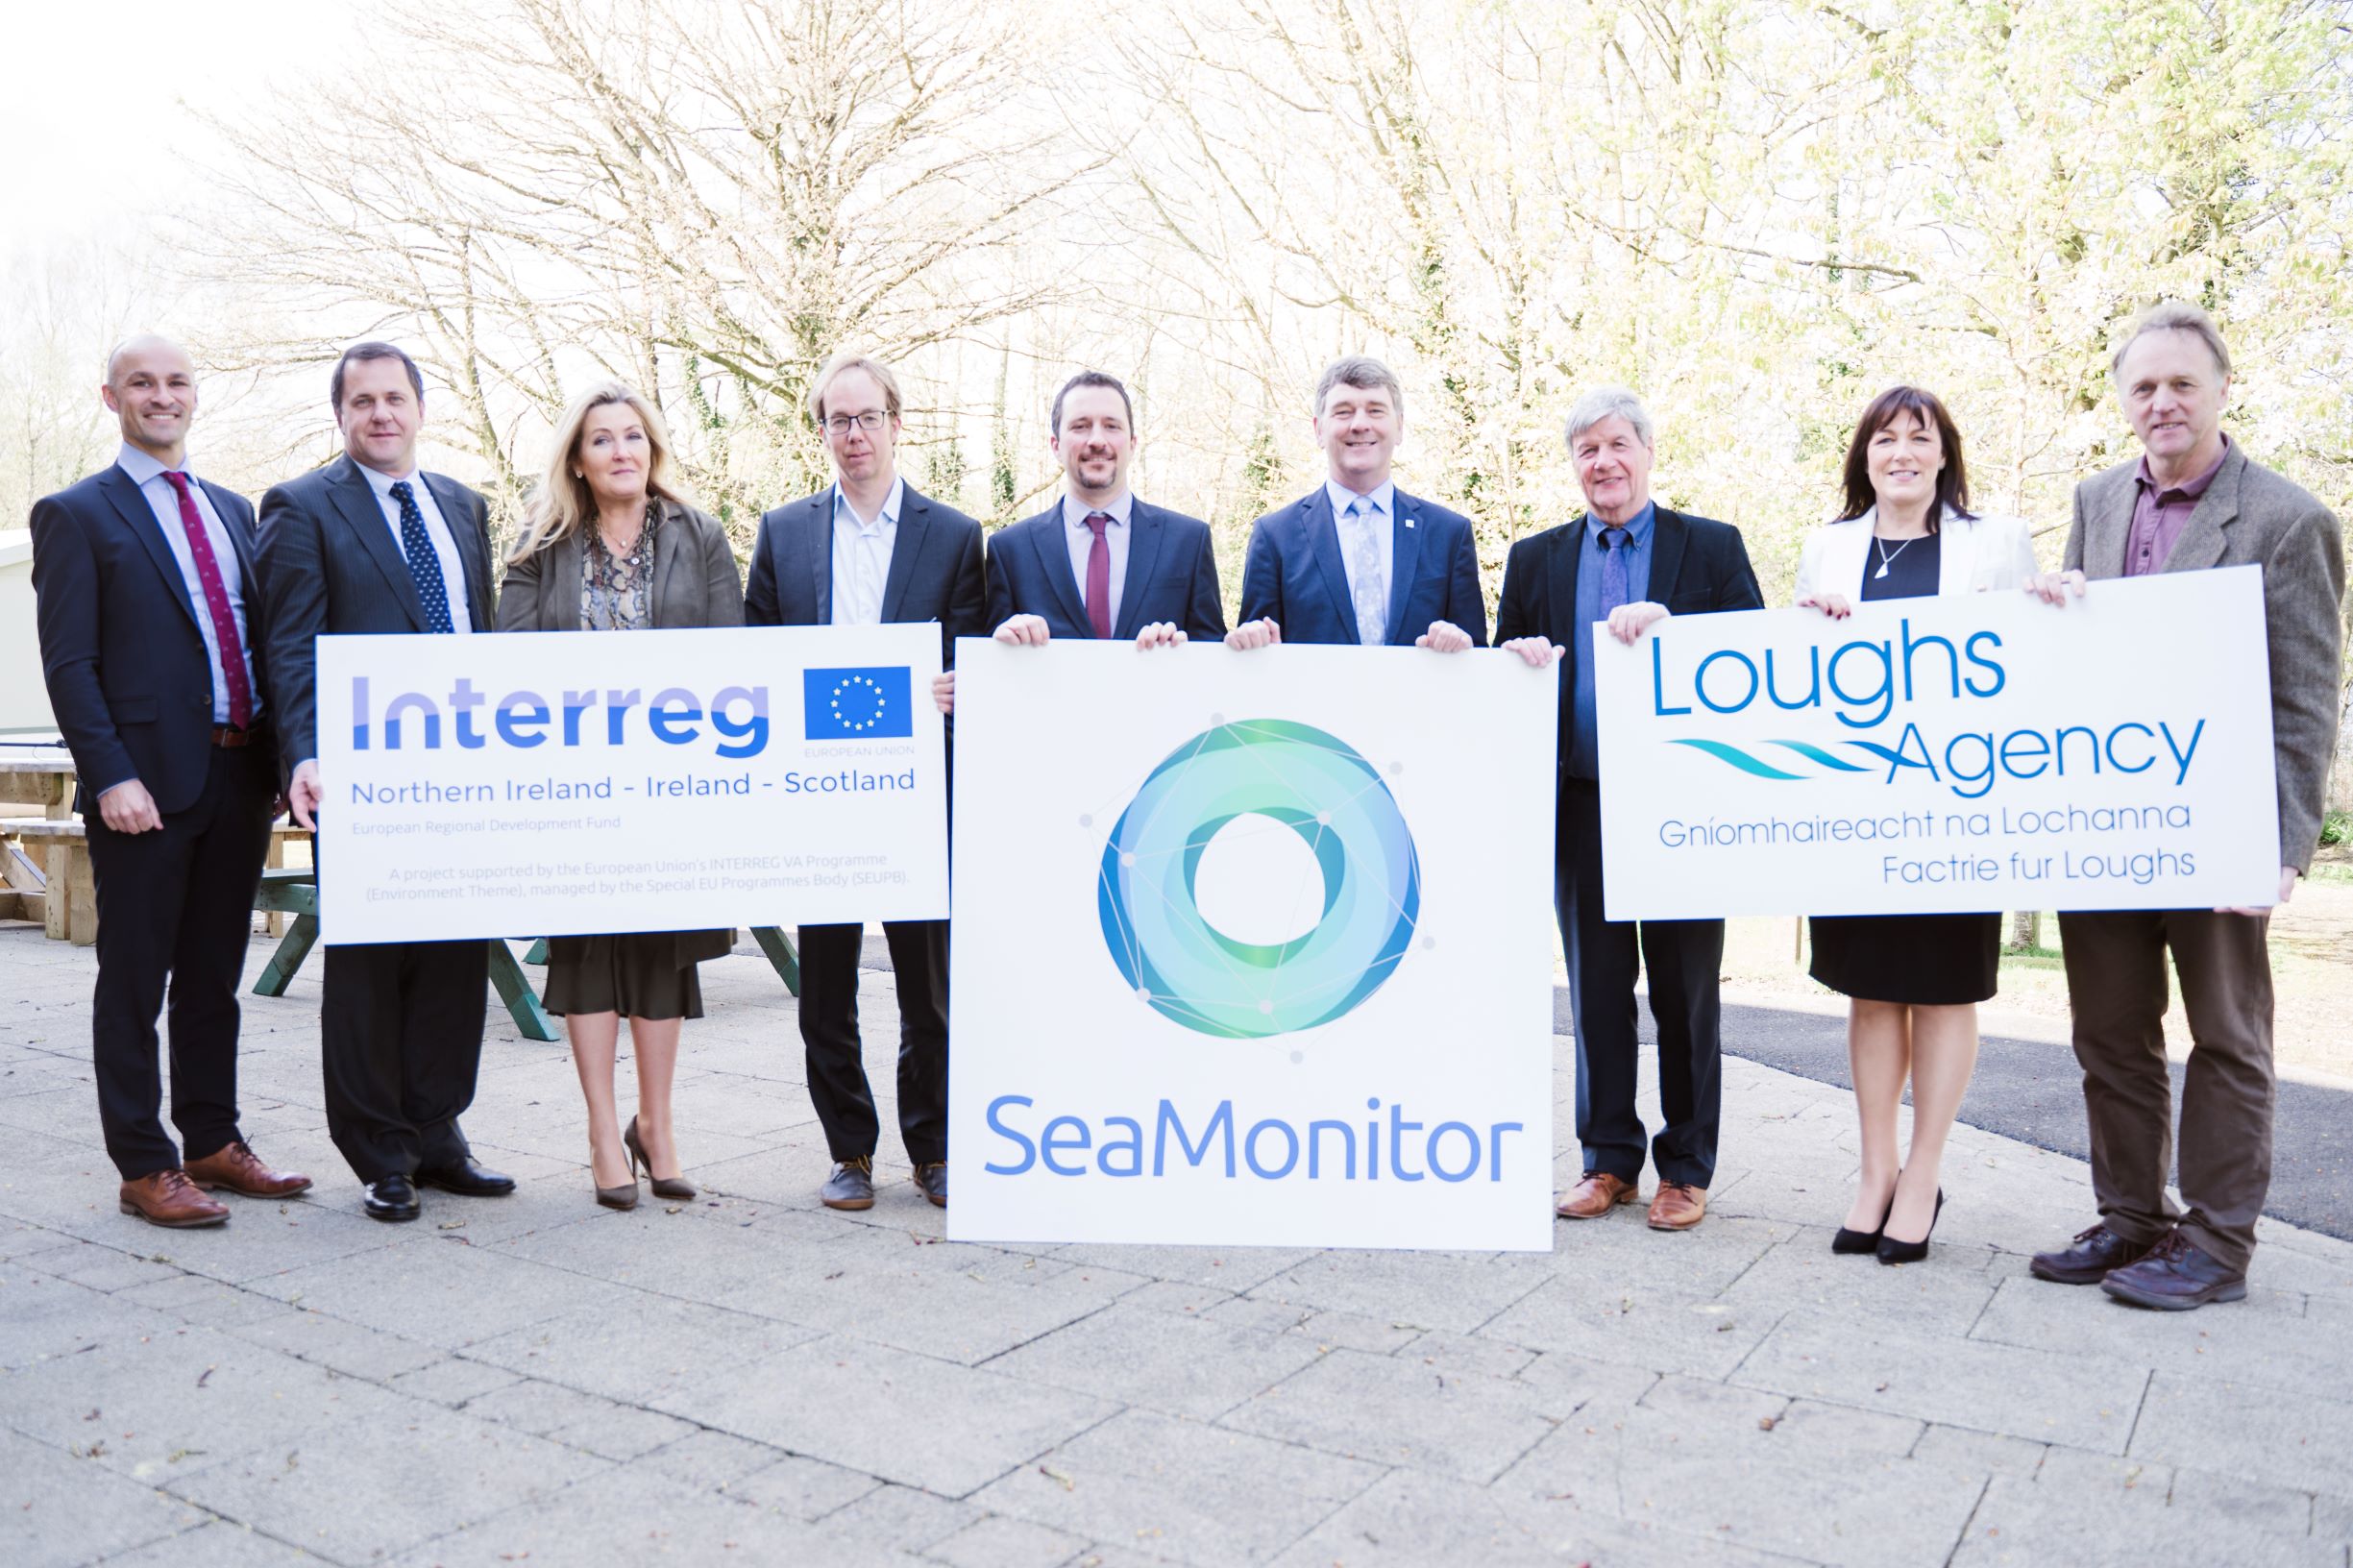 Sea Monitor: New EU Project to Support and Protect Vulnerable Marine Life